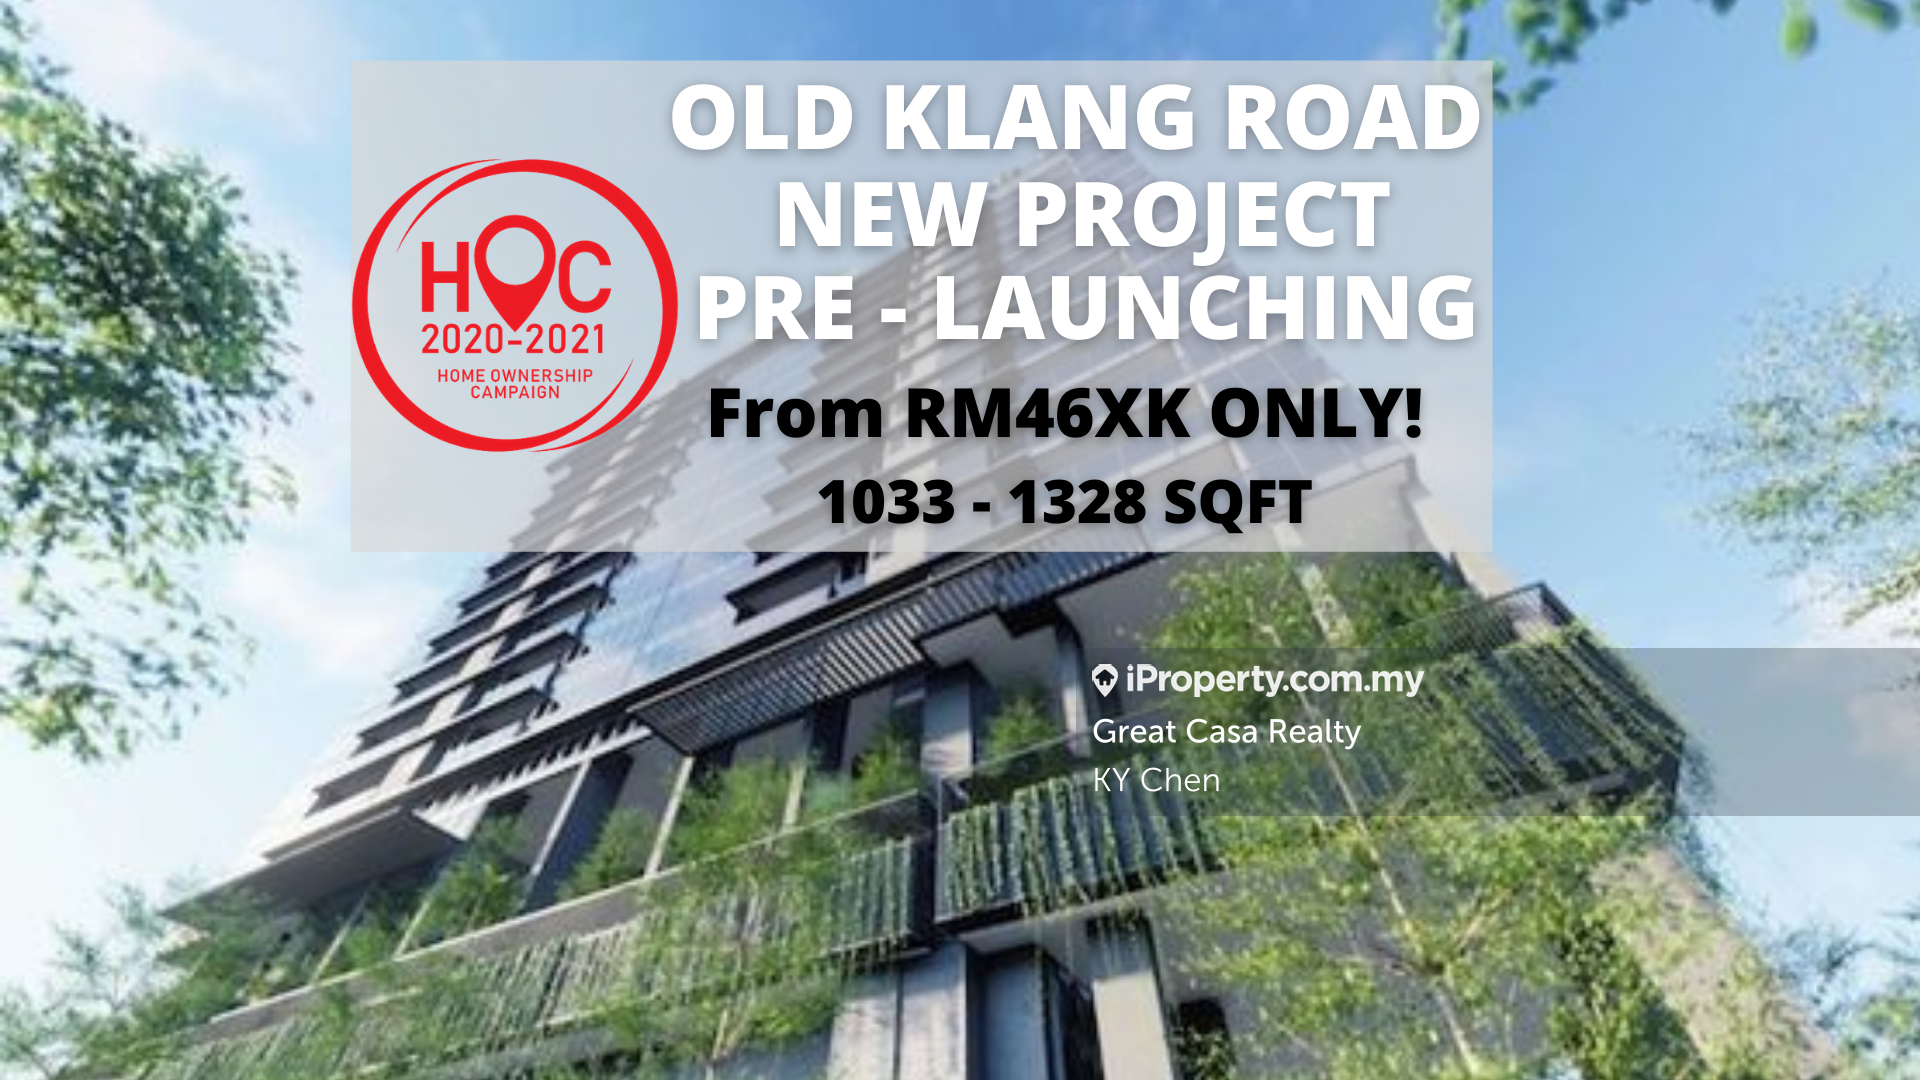 The harmony old klang road